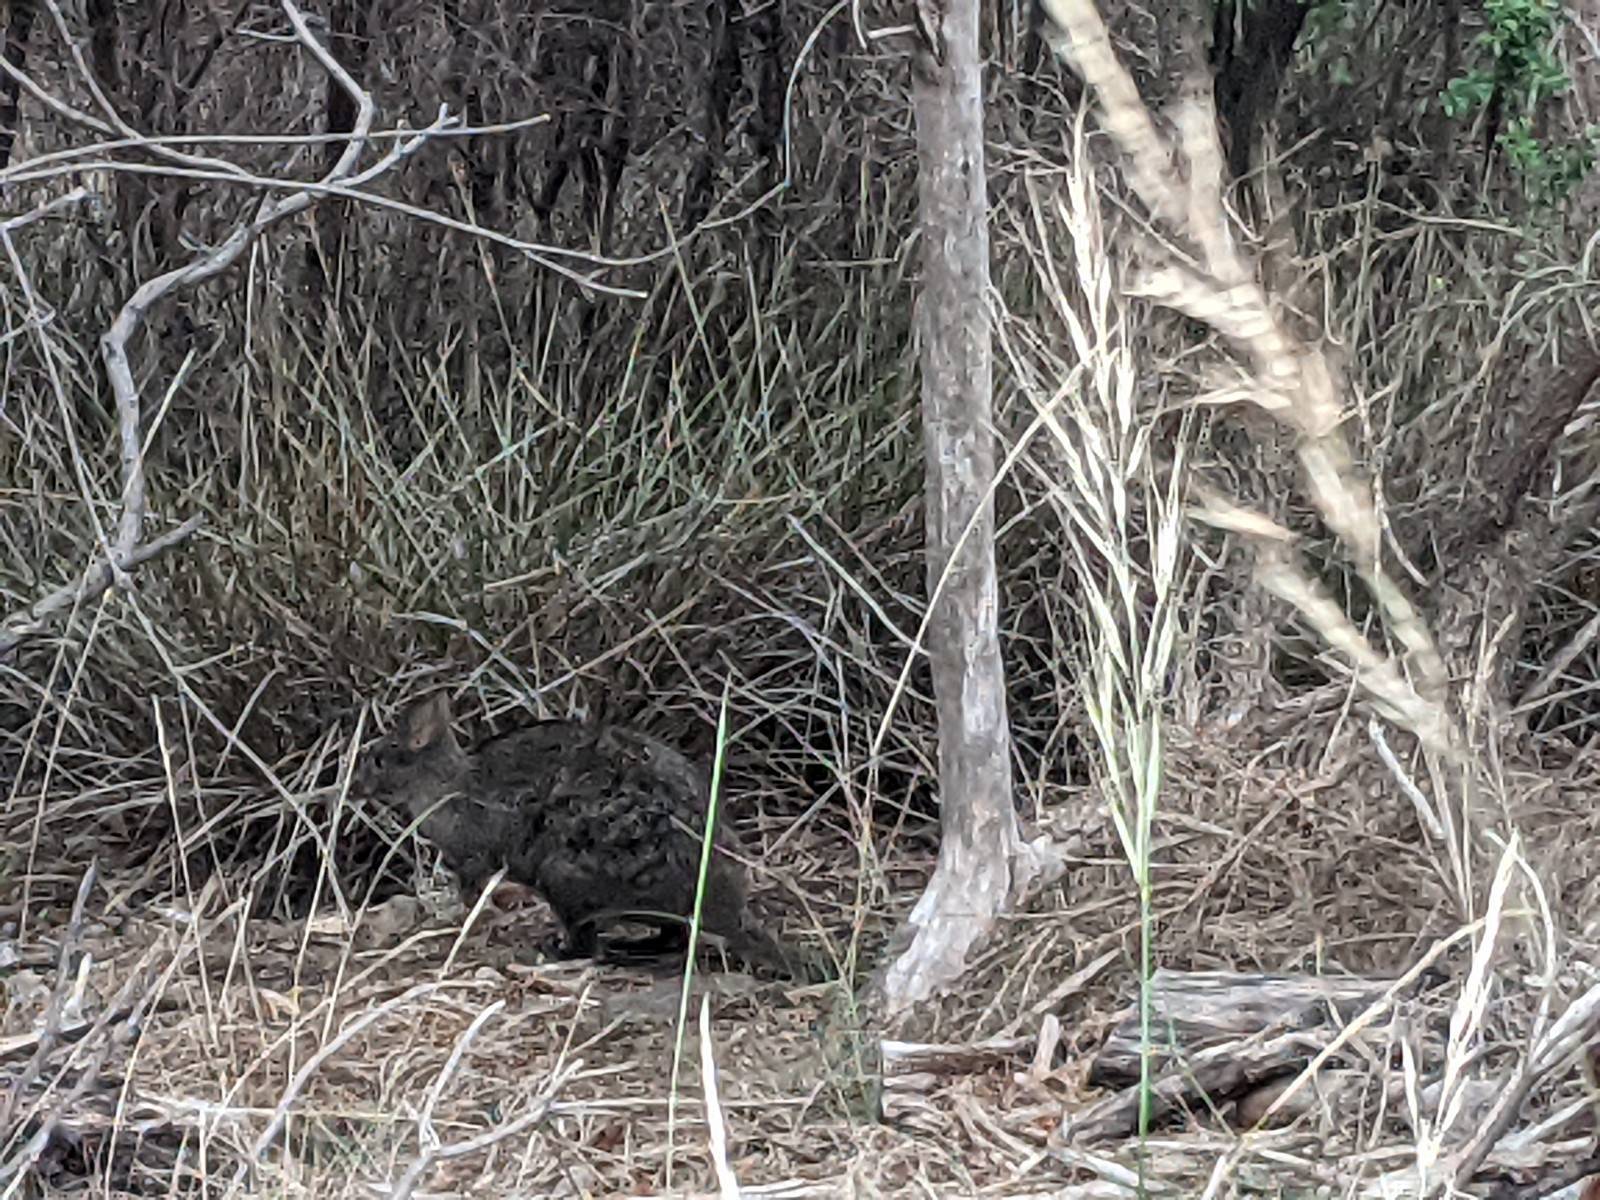 There was heaps of wildlife in the bush on either side of the parkrun course. I saw several small mammals while I was walking (and Brad was running). I think this is a pademelon? Kind of like a wallaby or a very small kangaroo but even shorter and stockier, but just as cute!